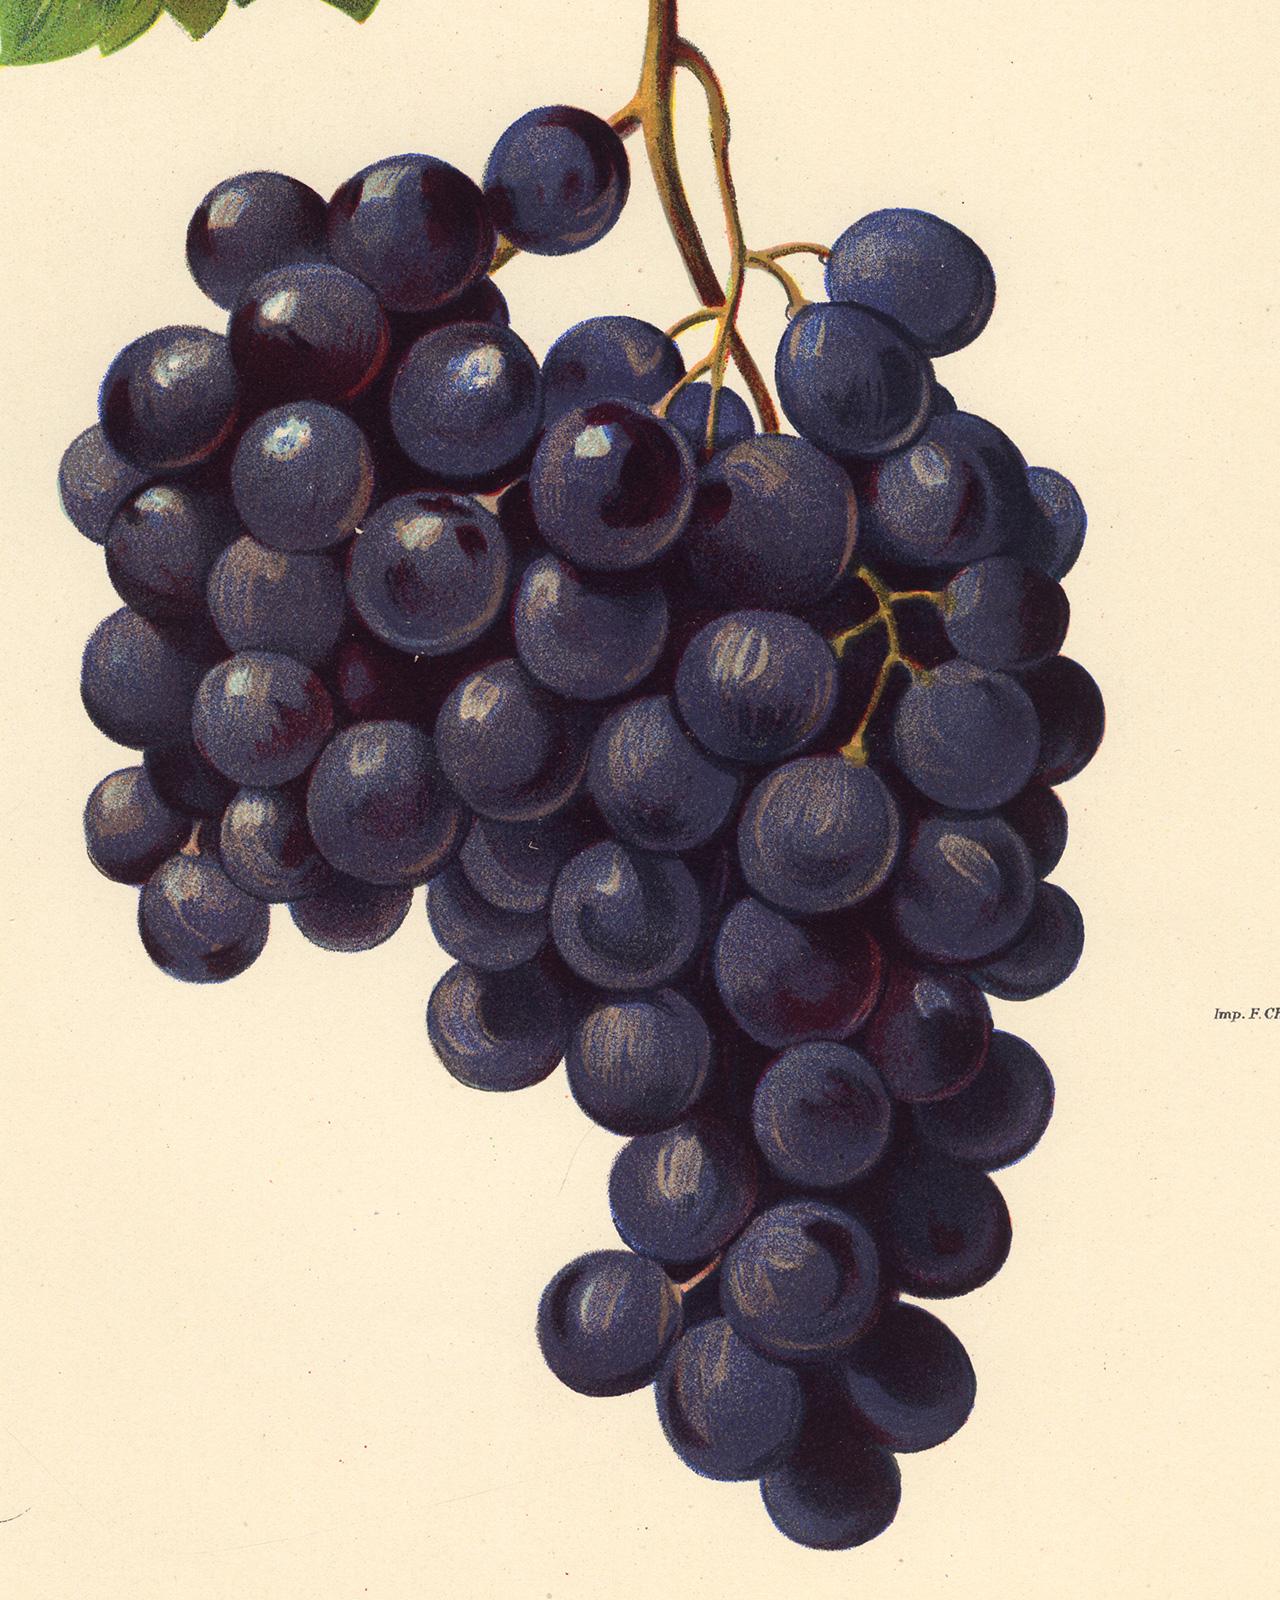 The Piedirosso grape - from Ampelography by Vermorel - Lithograph - Early 20th c - Contemporary Print by Victor Vermorel